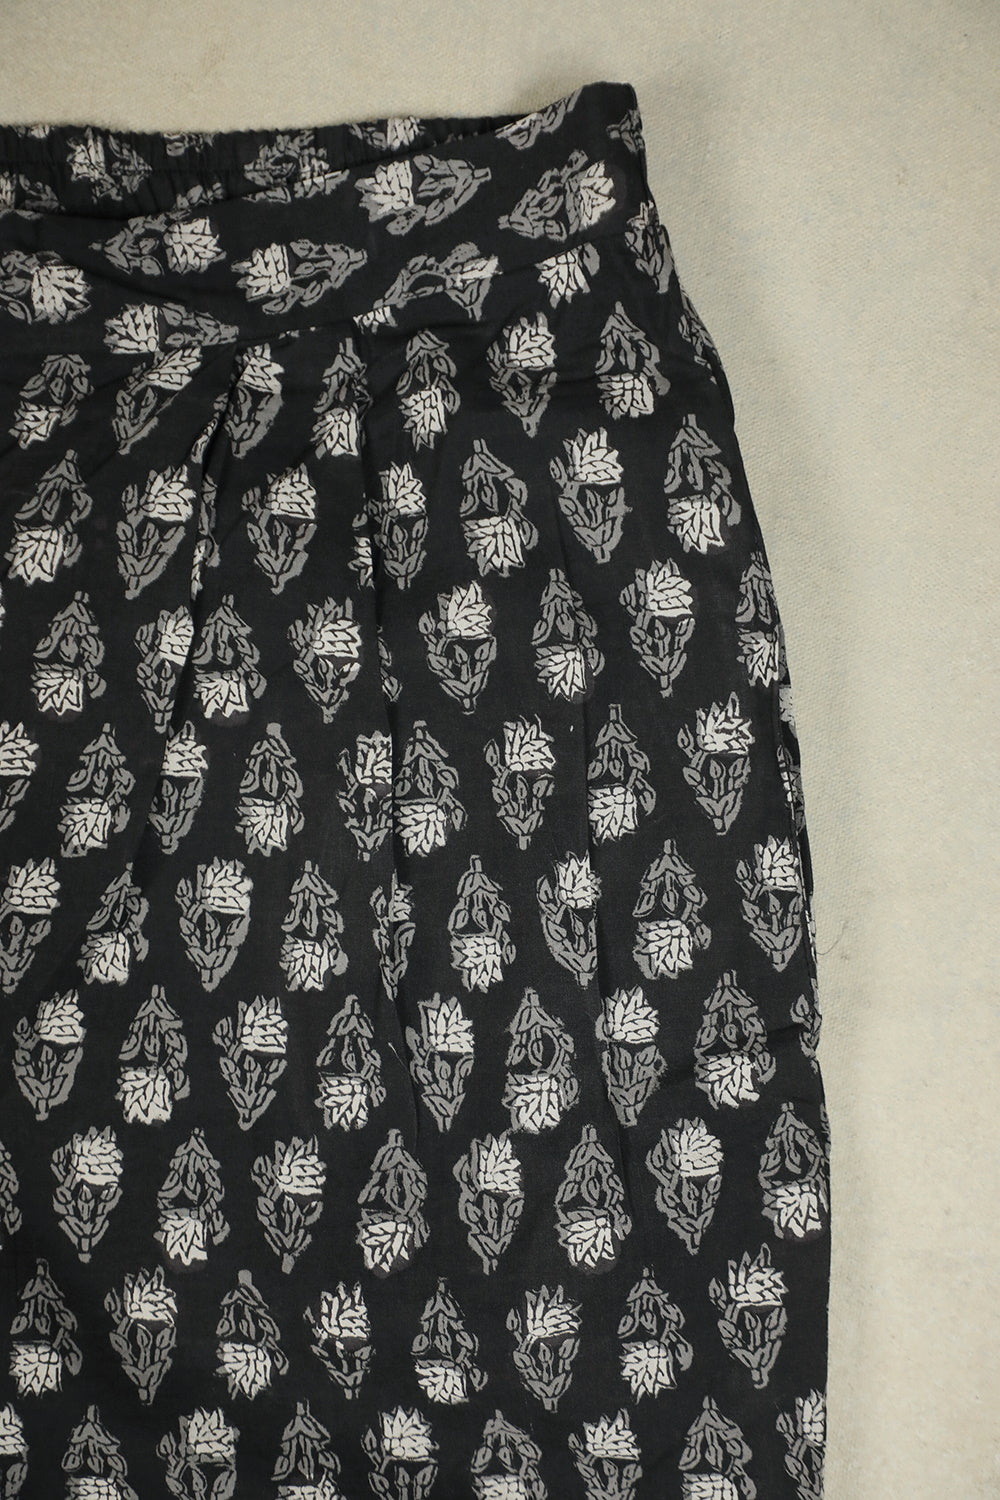 Small Florals on Black Block Printed Stitched Pant